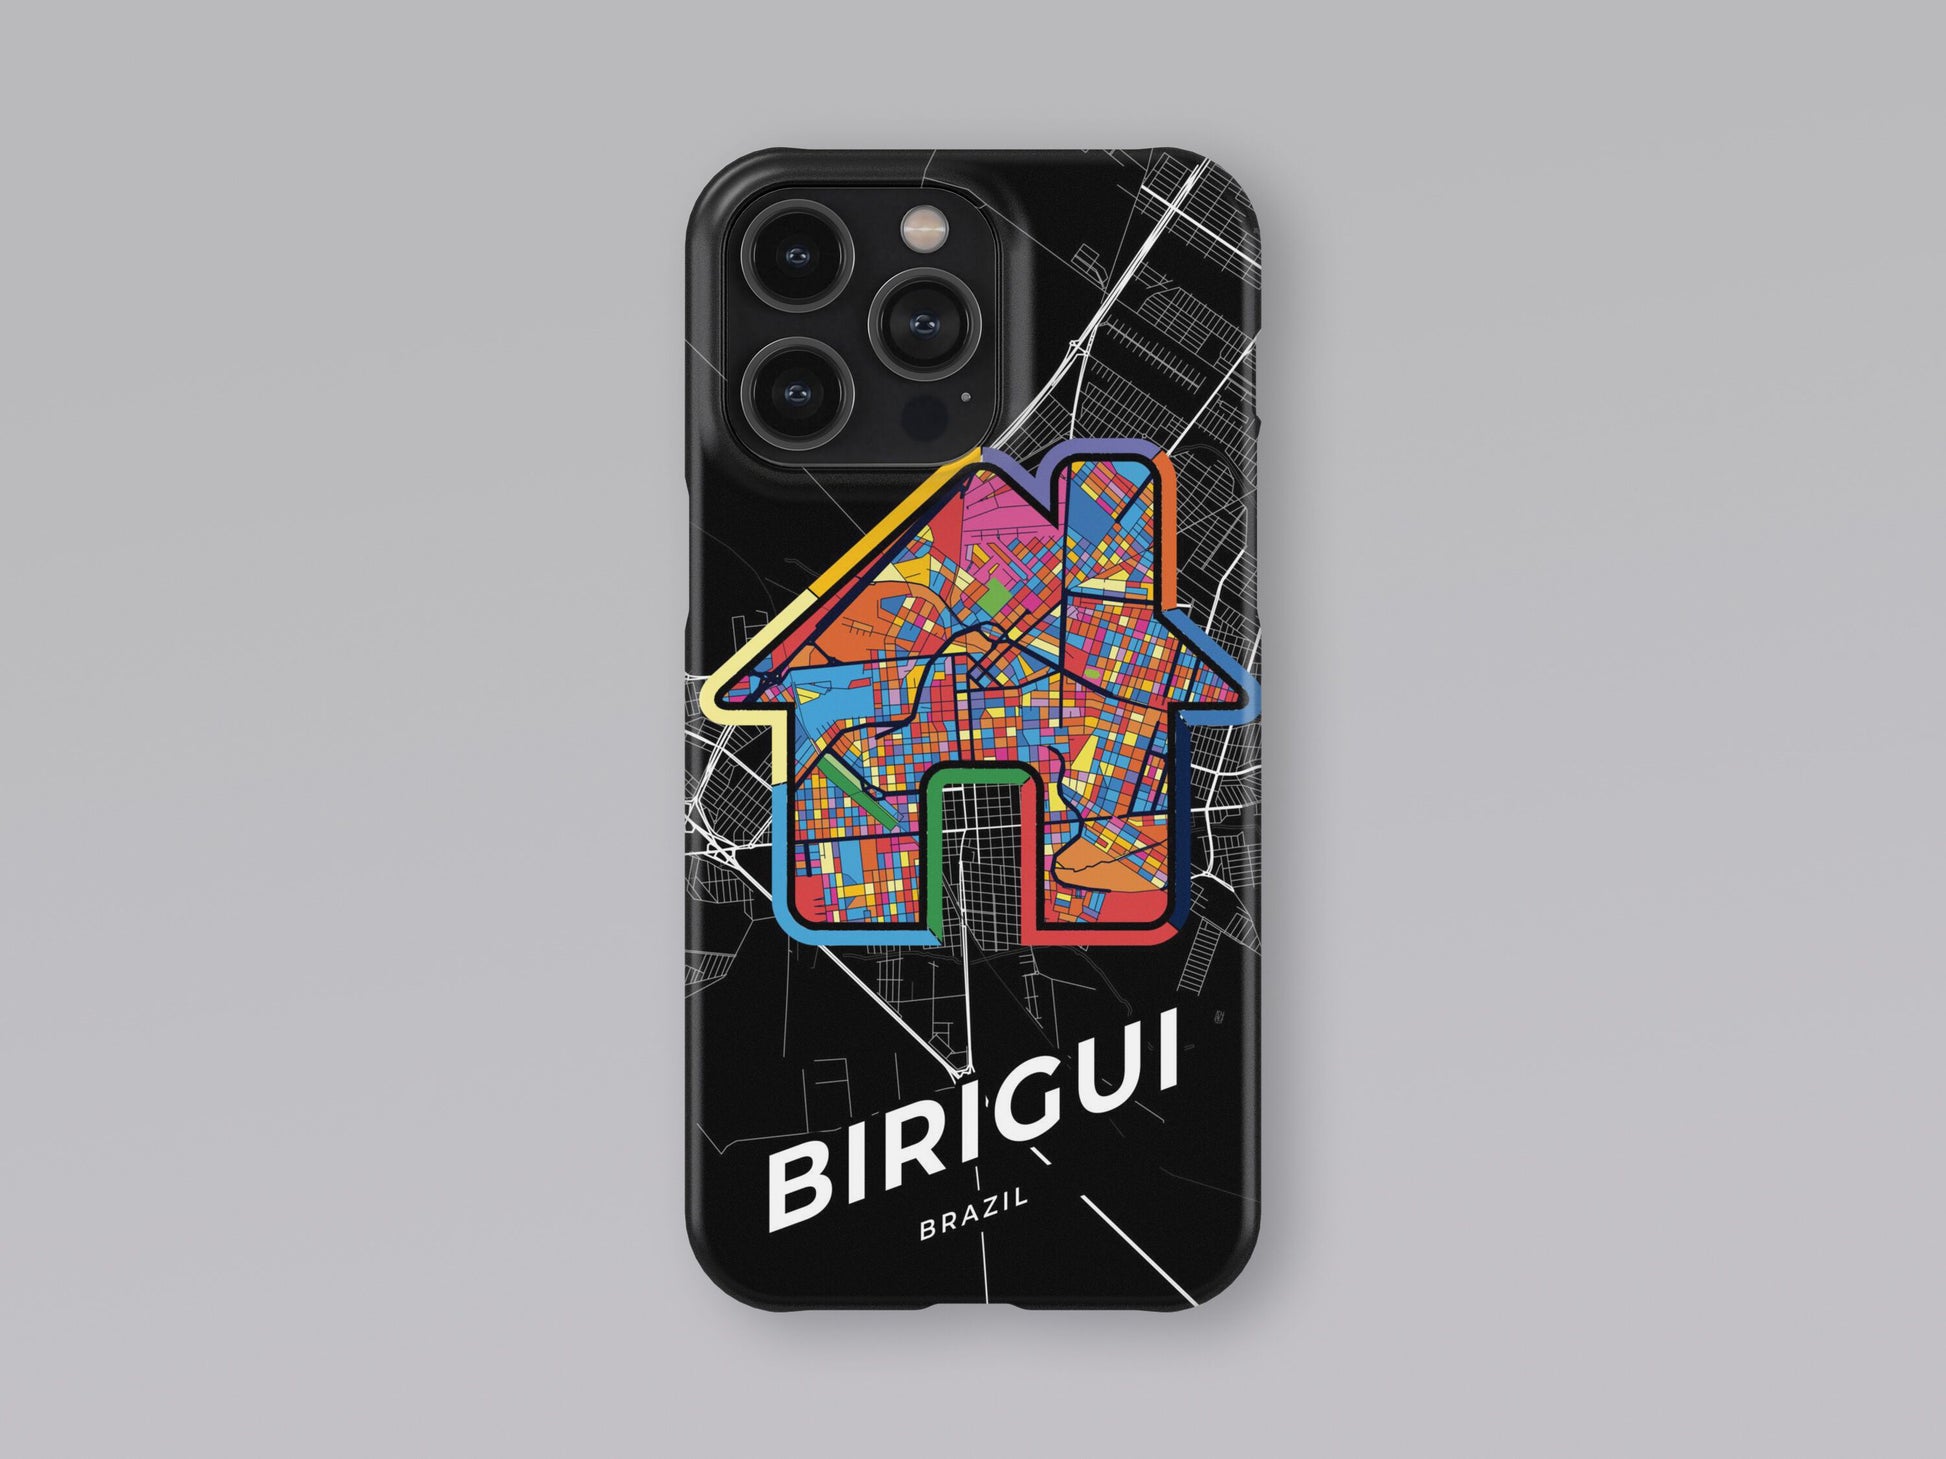 Birigui Brazil slim phone case with colorful icon. Birthday, wedding or housewarming gift. Couple match cases. 3